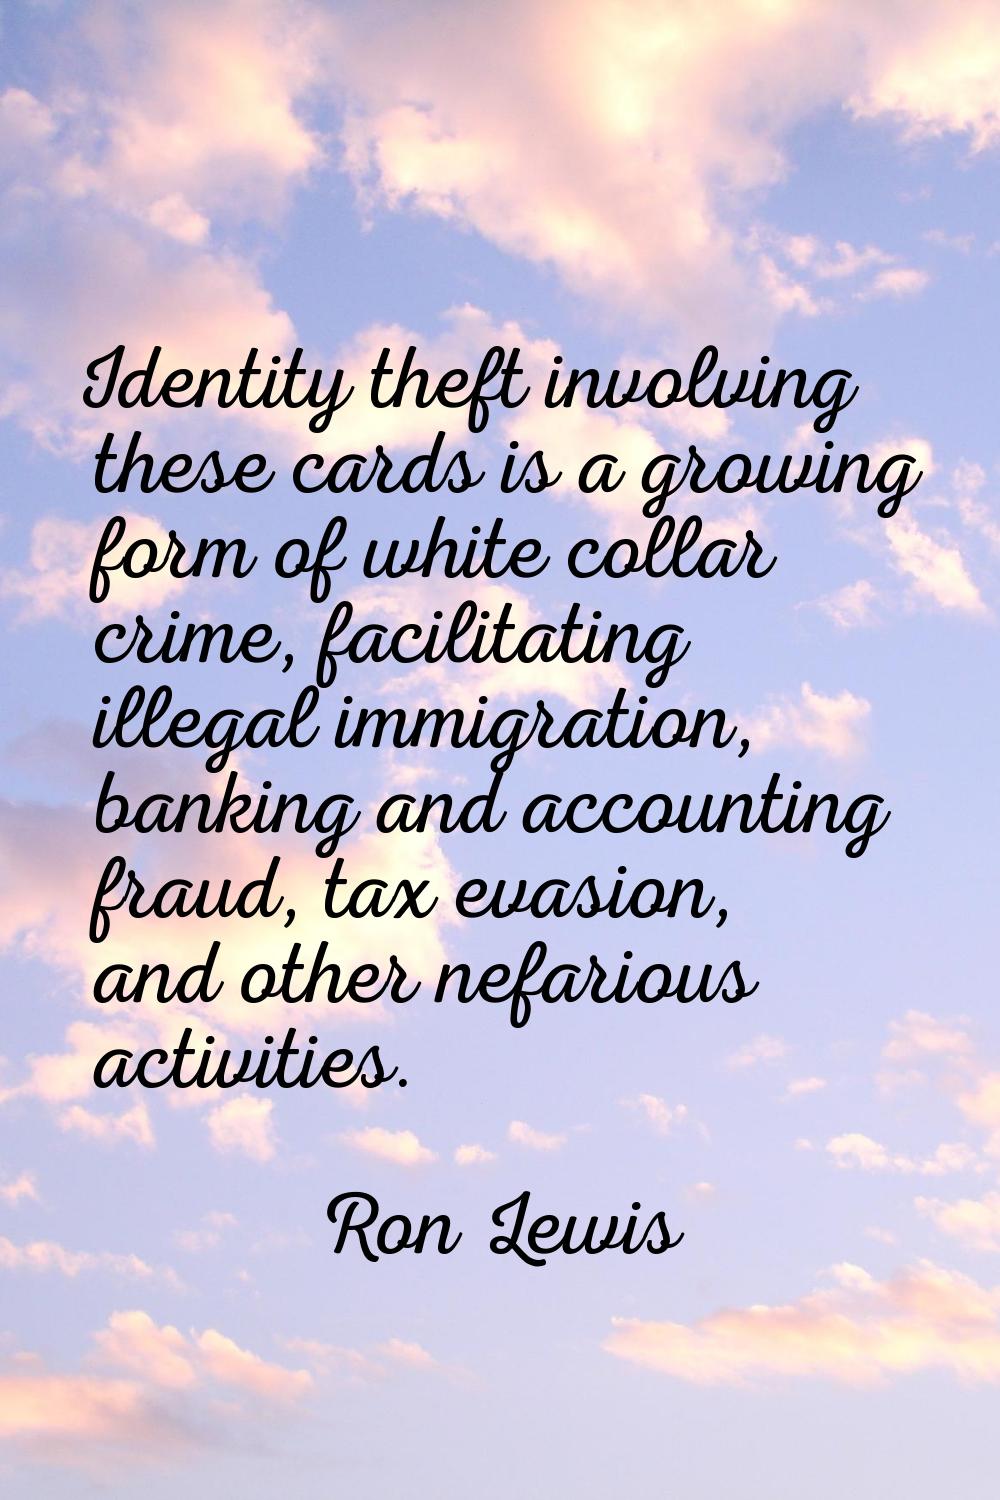 Identity theft involving these cards is a growing form of white collar crime, facilitating illegal 